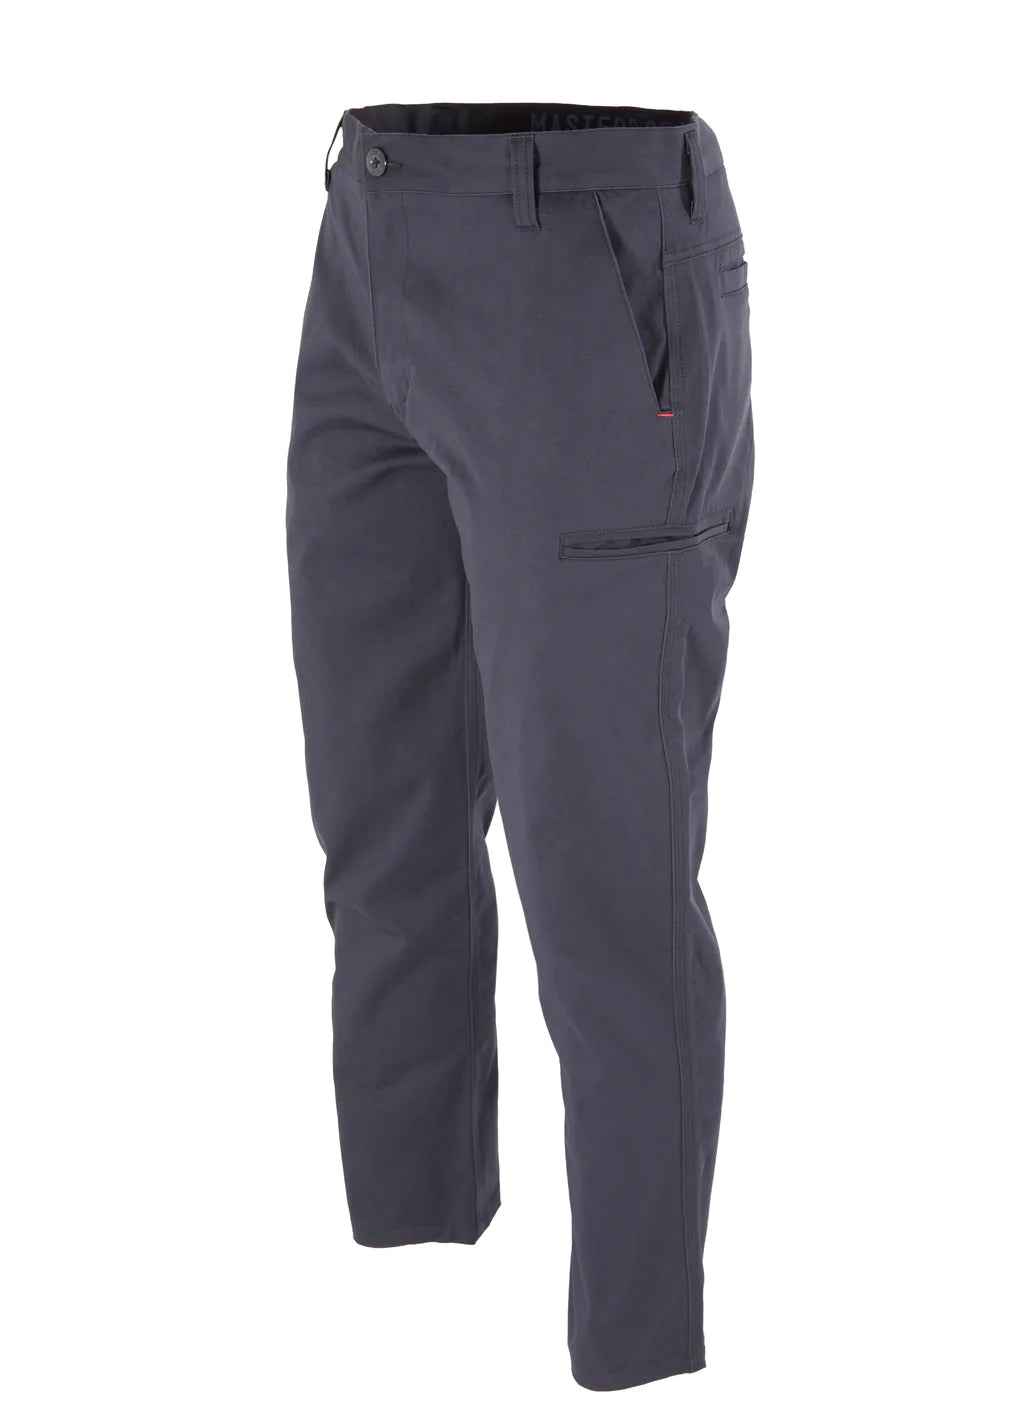 MENS PANTS - 189119002 - WORK  IGNITION